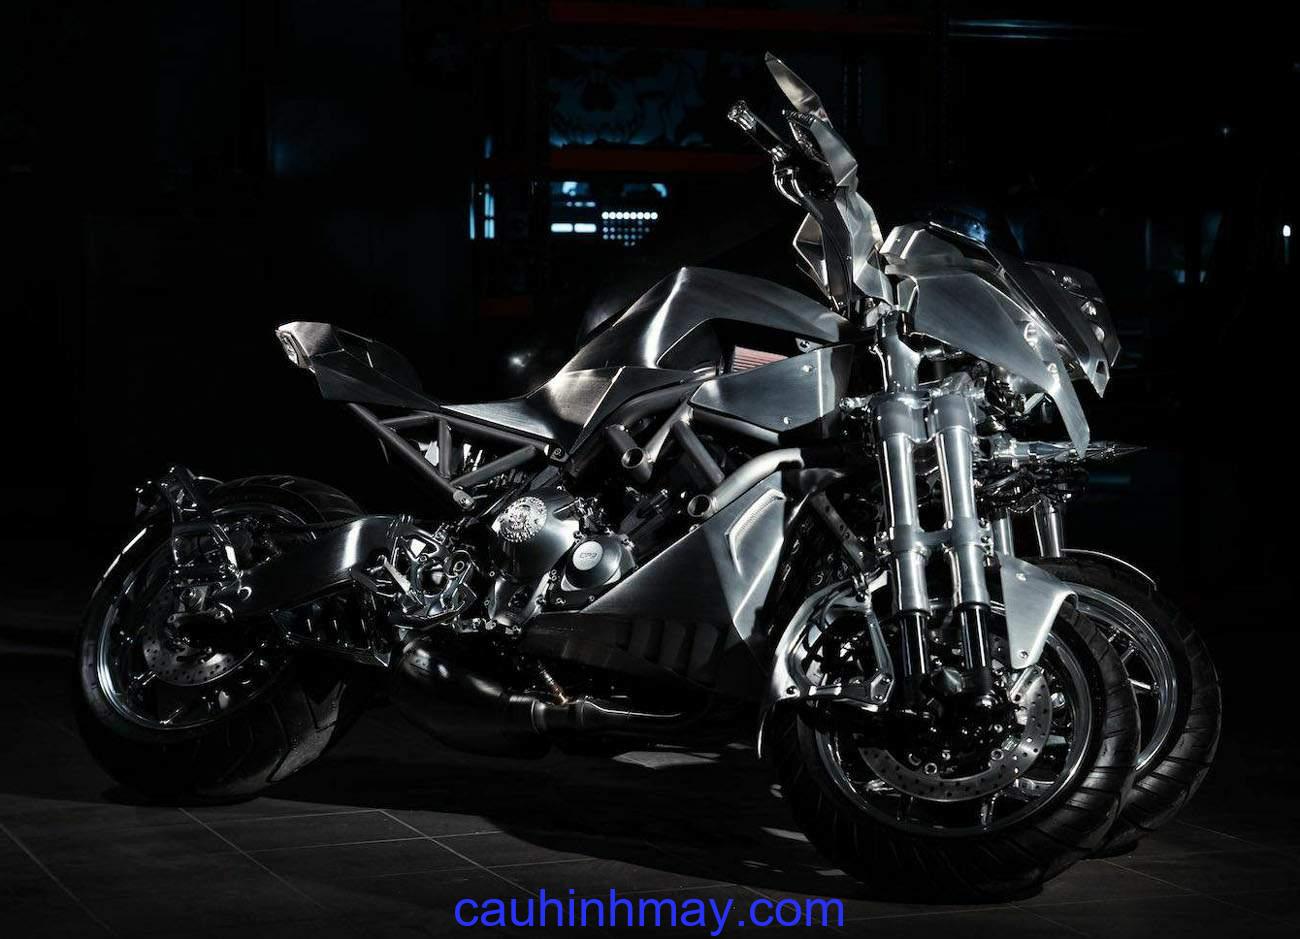 YAMAHA NIKEN CUSTOM BY GAME OVER CYCLES - cauhinhmay.com